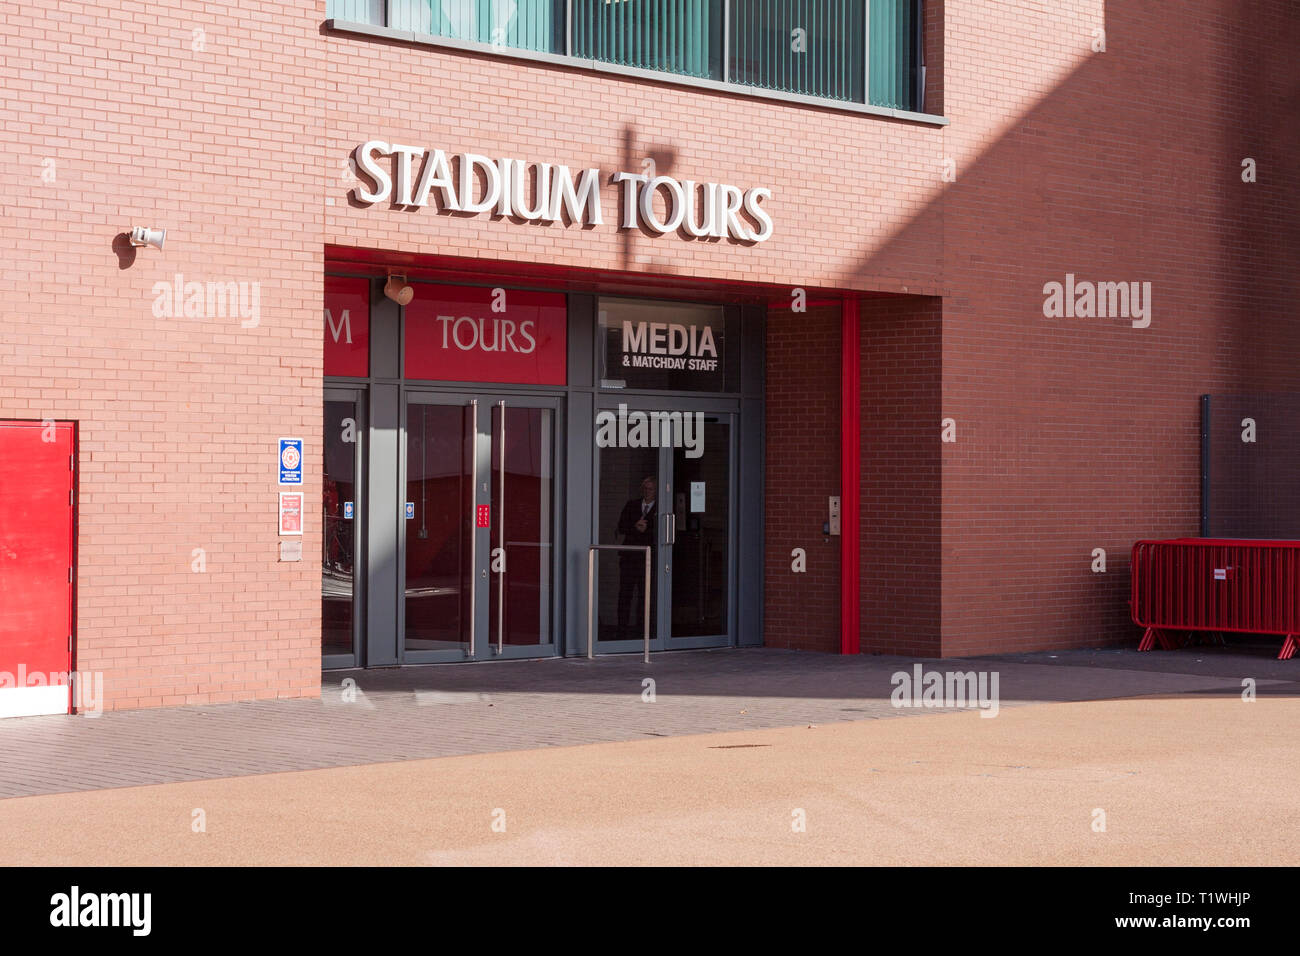 Entrance to the stadium tours office at Anfield, home to Liverpool FC, Merseyside, UK Stock Photo